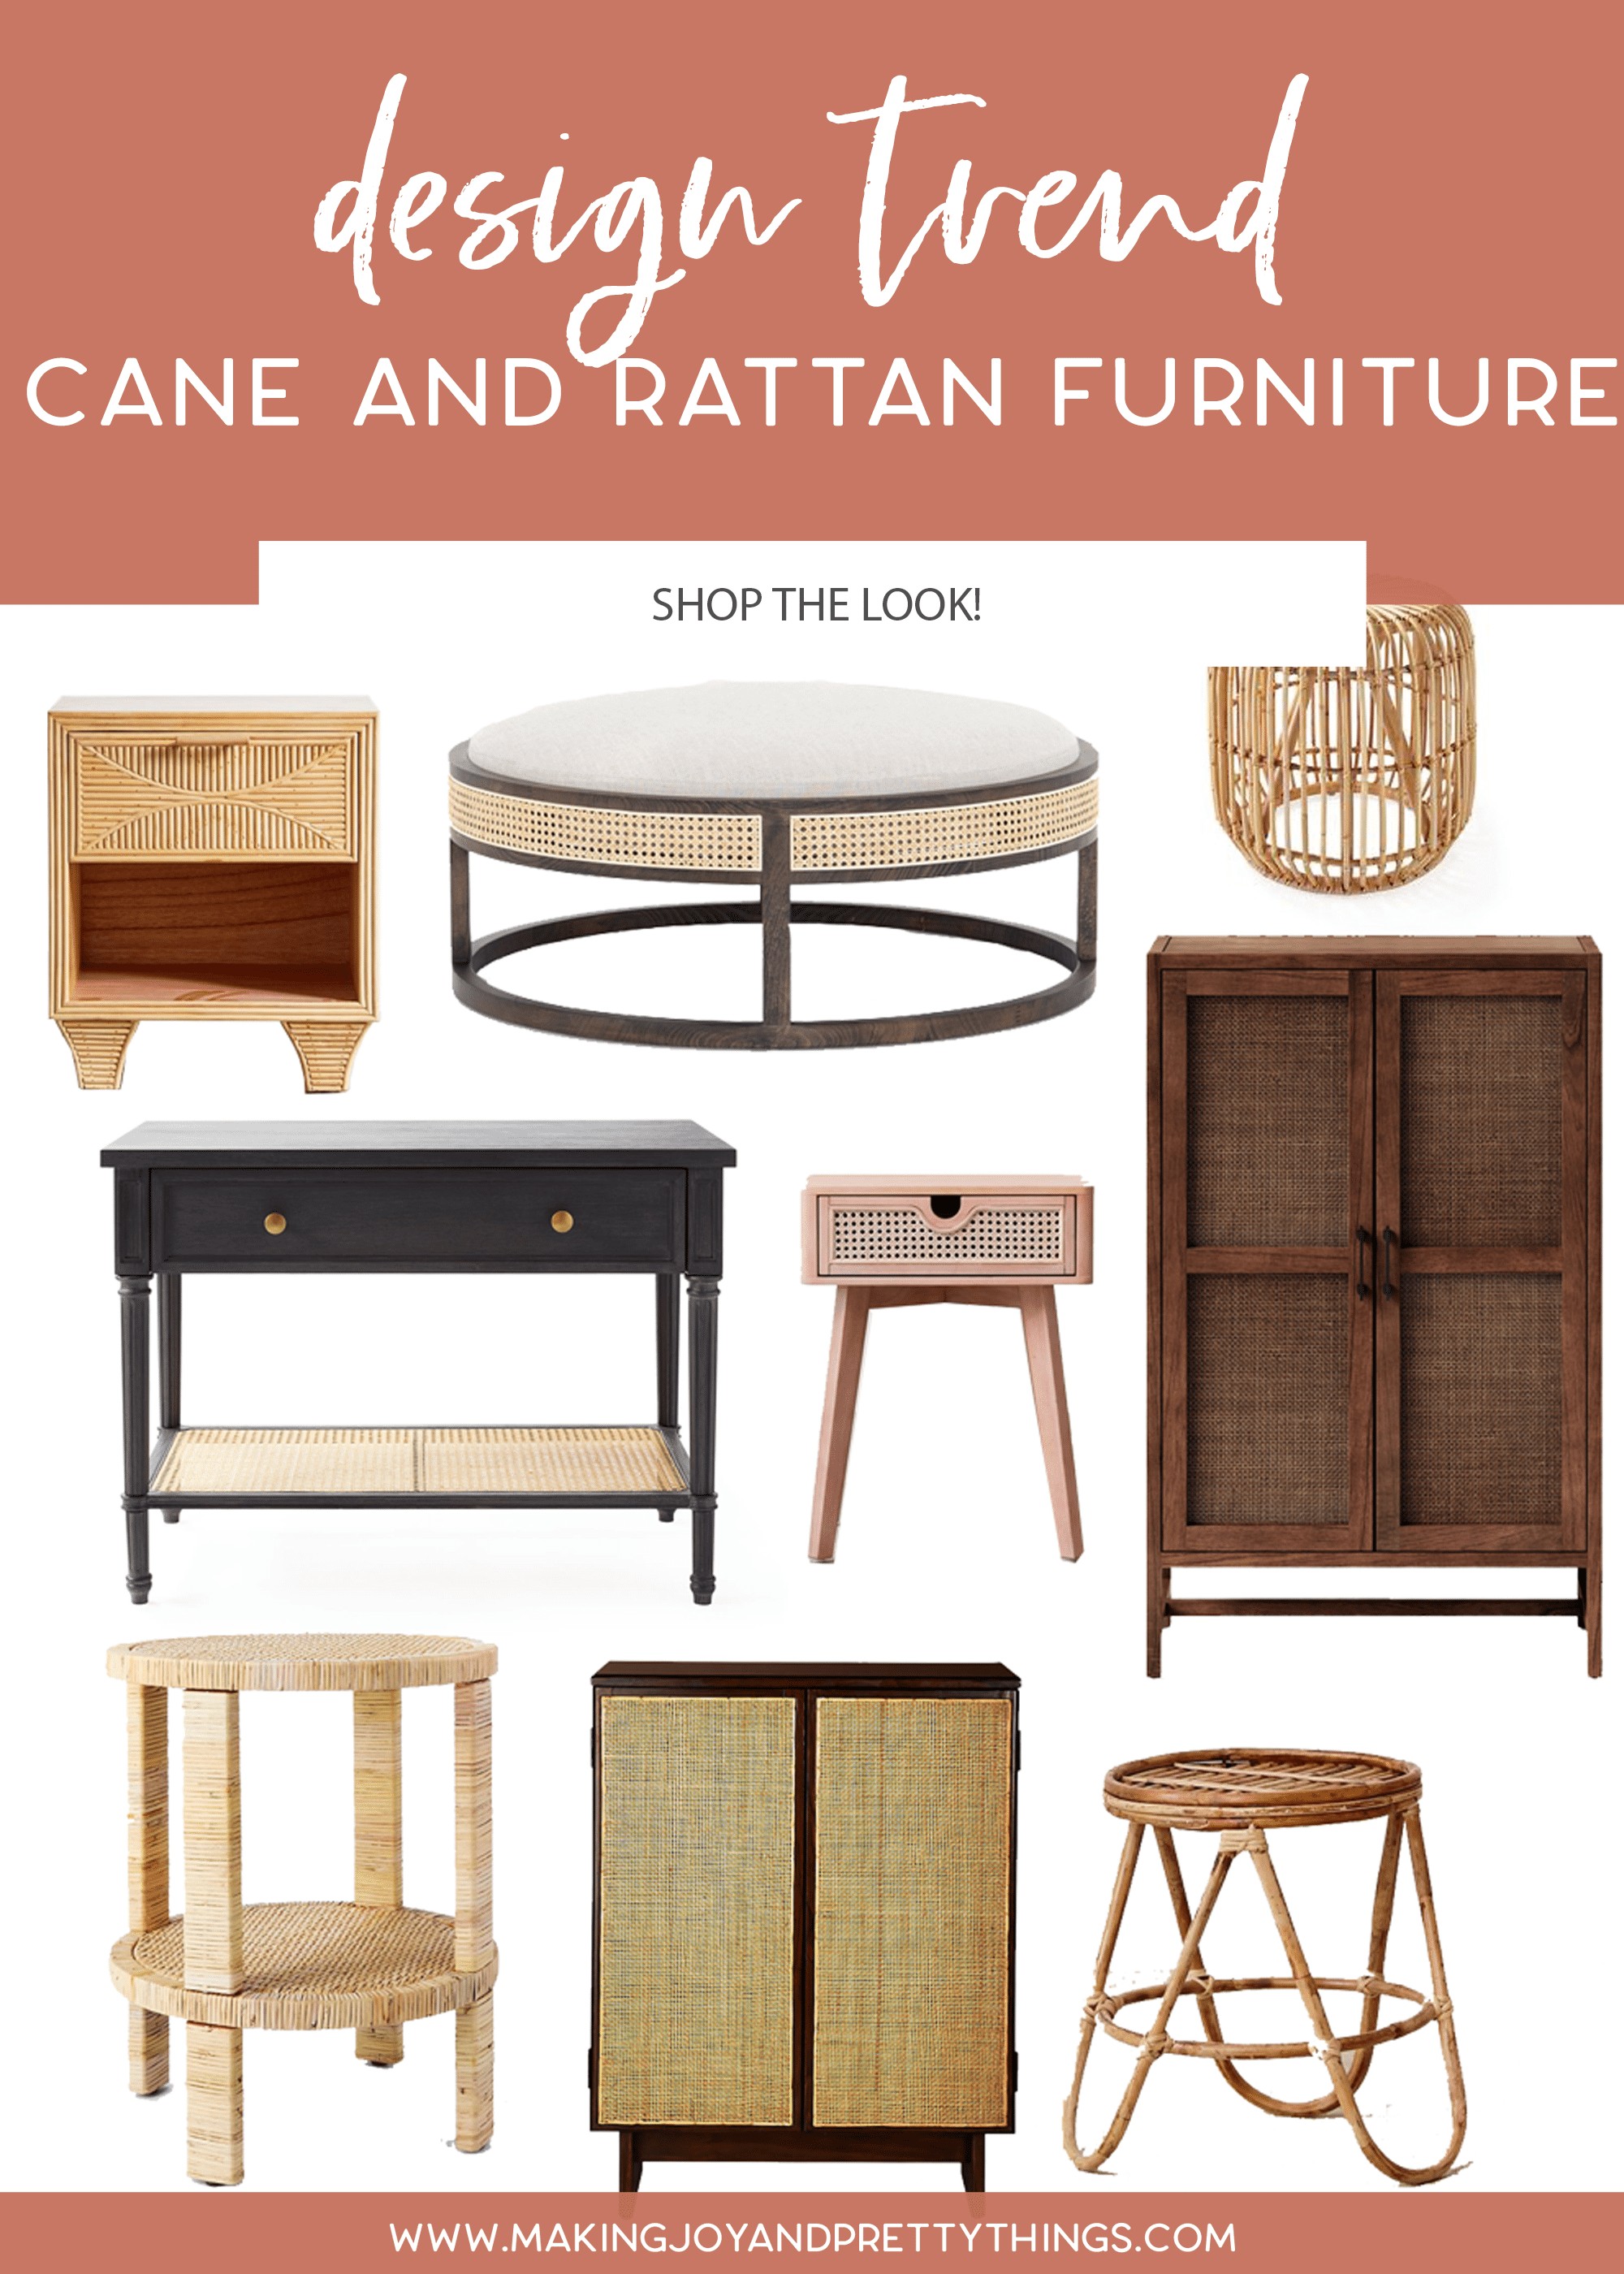 Chatting about a design trend that I’m loving - cane furniture and rattan furniture!  Also going to share the difference between cane, rattan, and wicker and some of my favorite cane and rattan styles. 